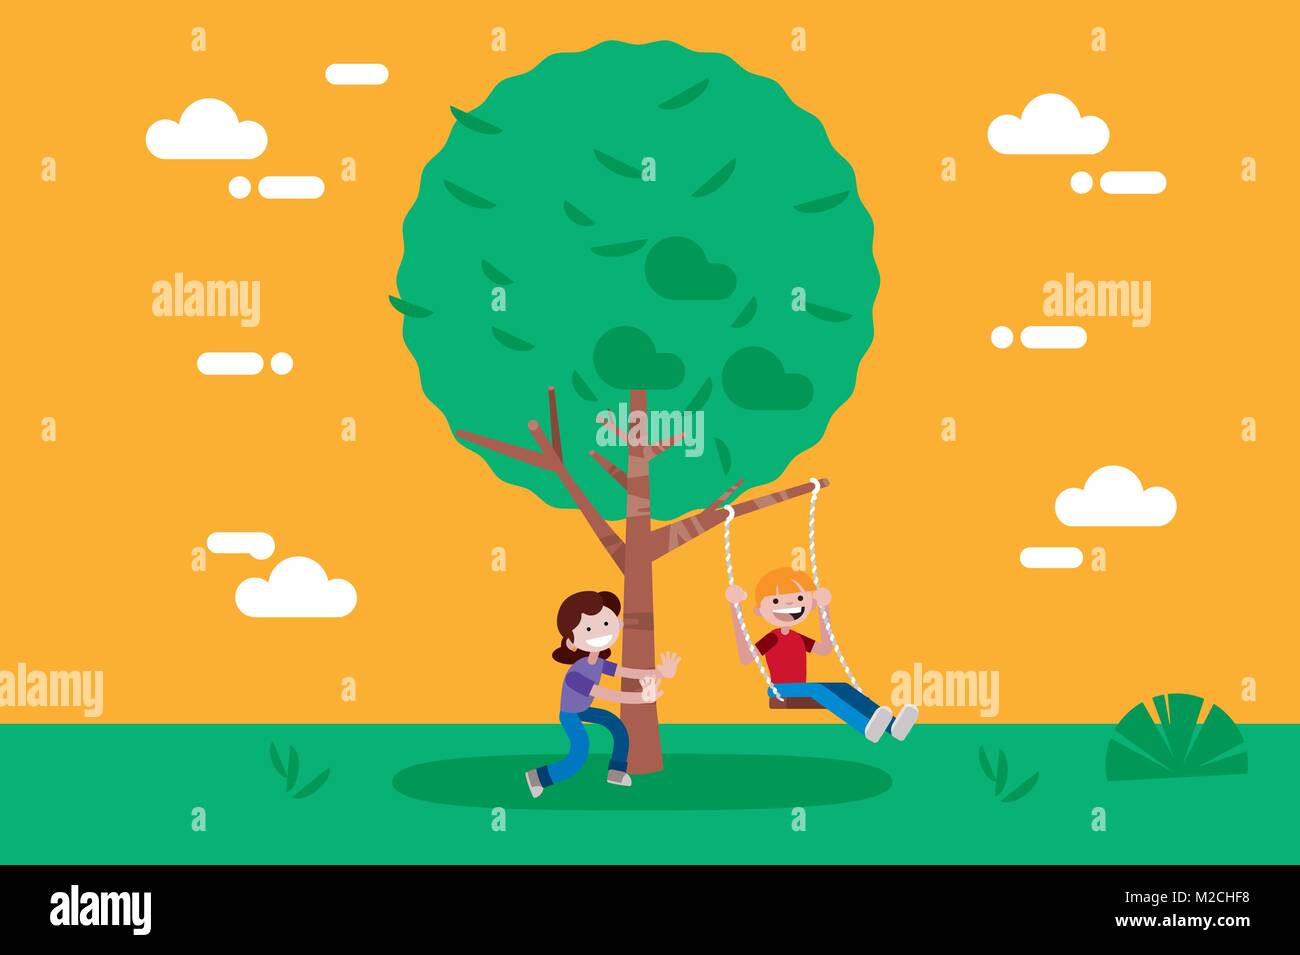 Children (boy and girl) swinging on a Swing Tree. Vector illustration in a flat minimal style. Stock Vector